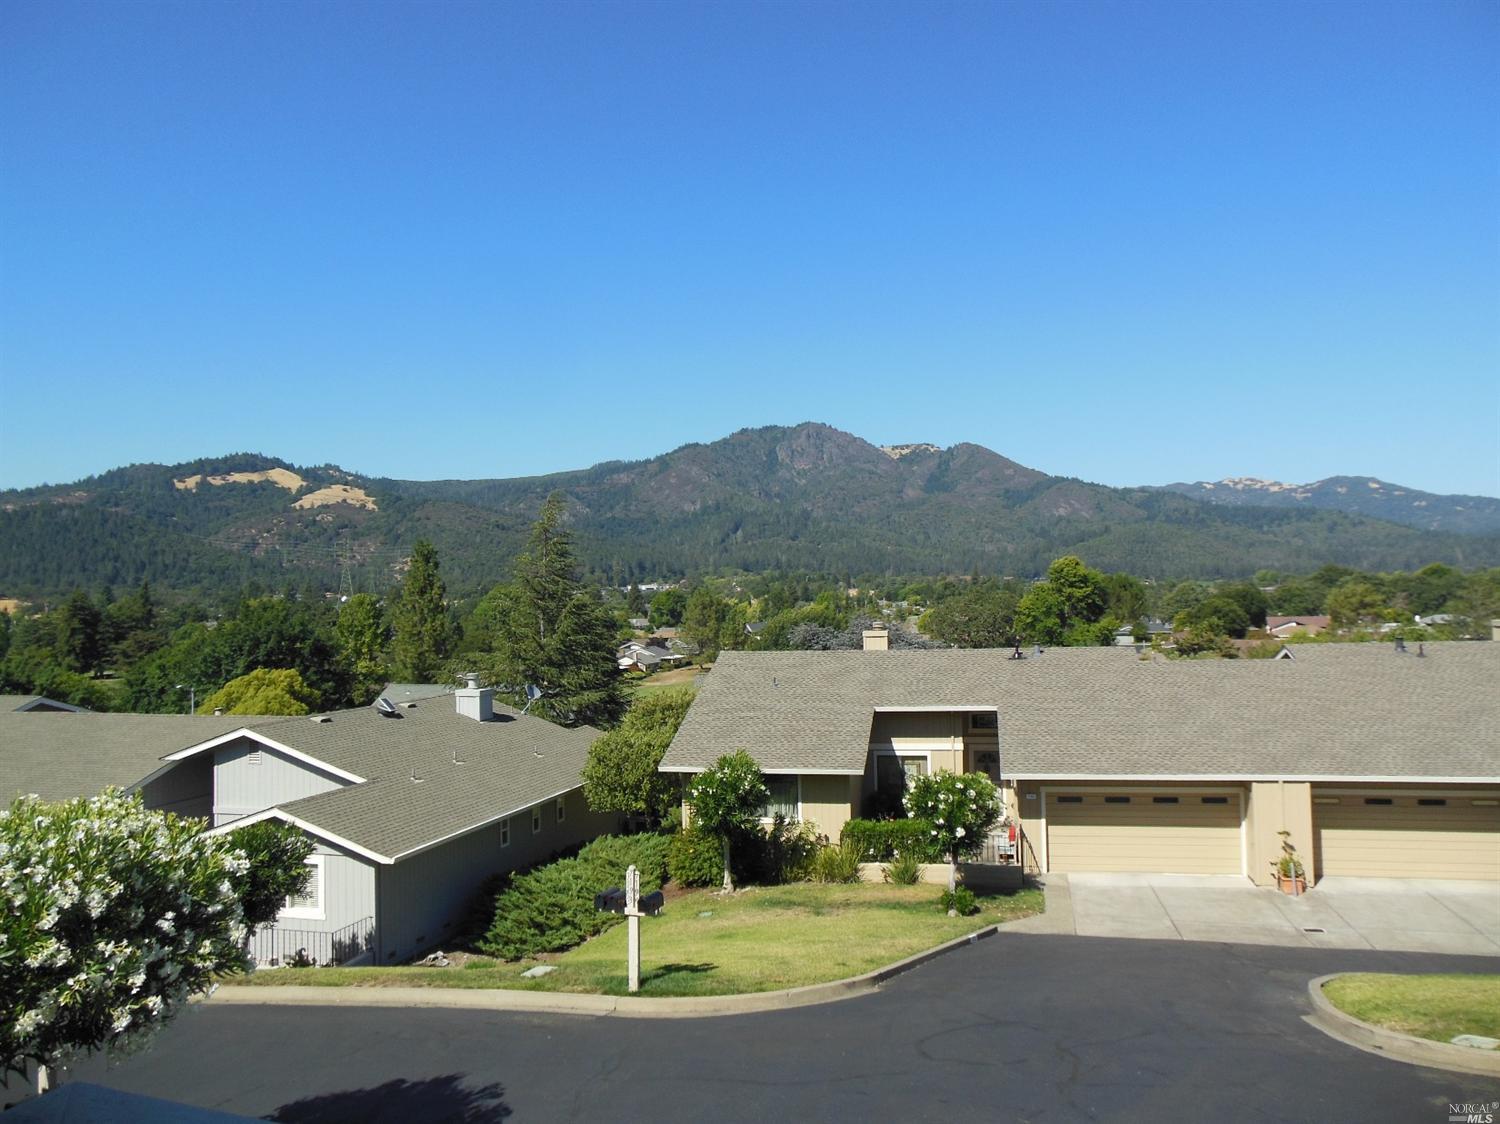 an aerial view of a house with yard and mountain view in back